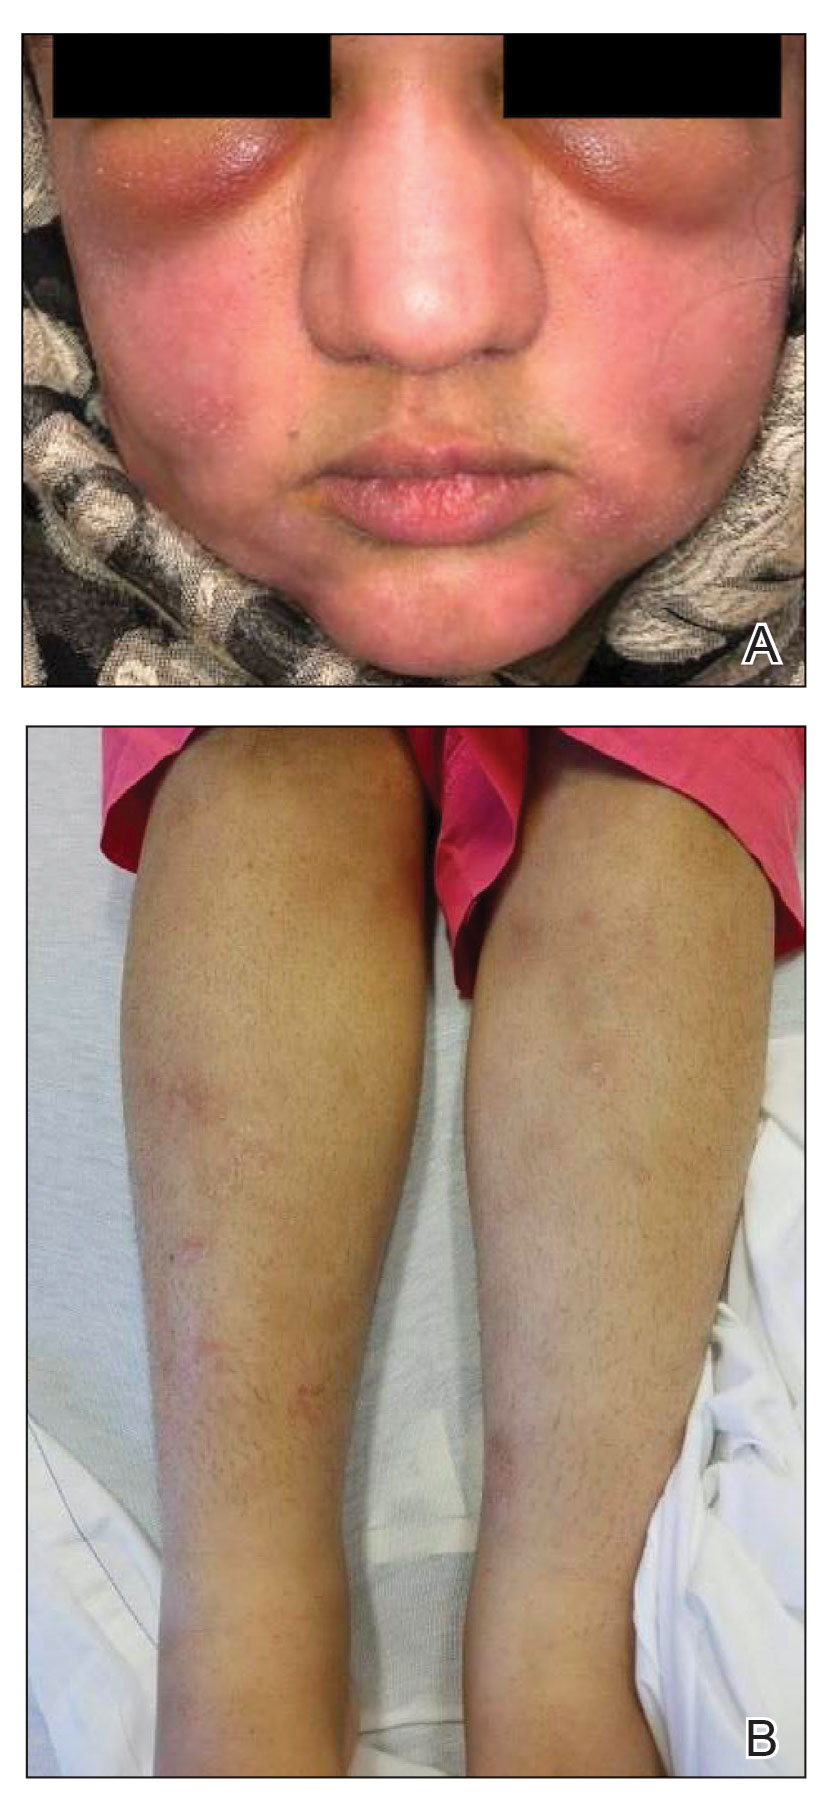 A, Edema of the periorbital skin and cheeks, as well as pink scaly plaques on the cheeks and chin. B, Scattered hyperpigmented scaly plaques with indurated nodules on the legs. 